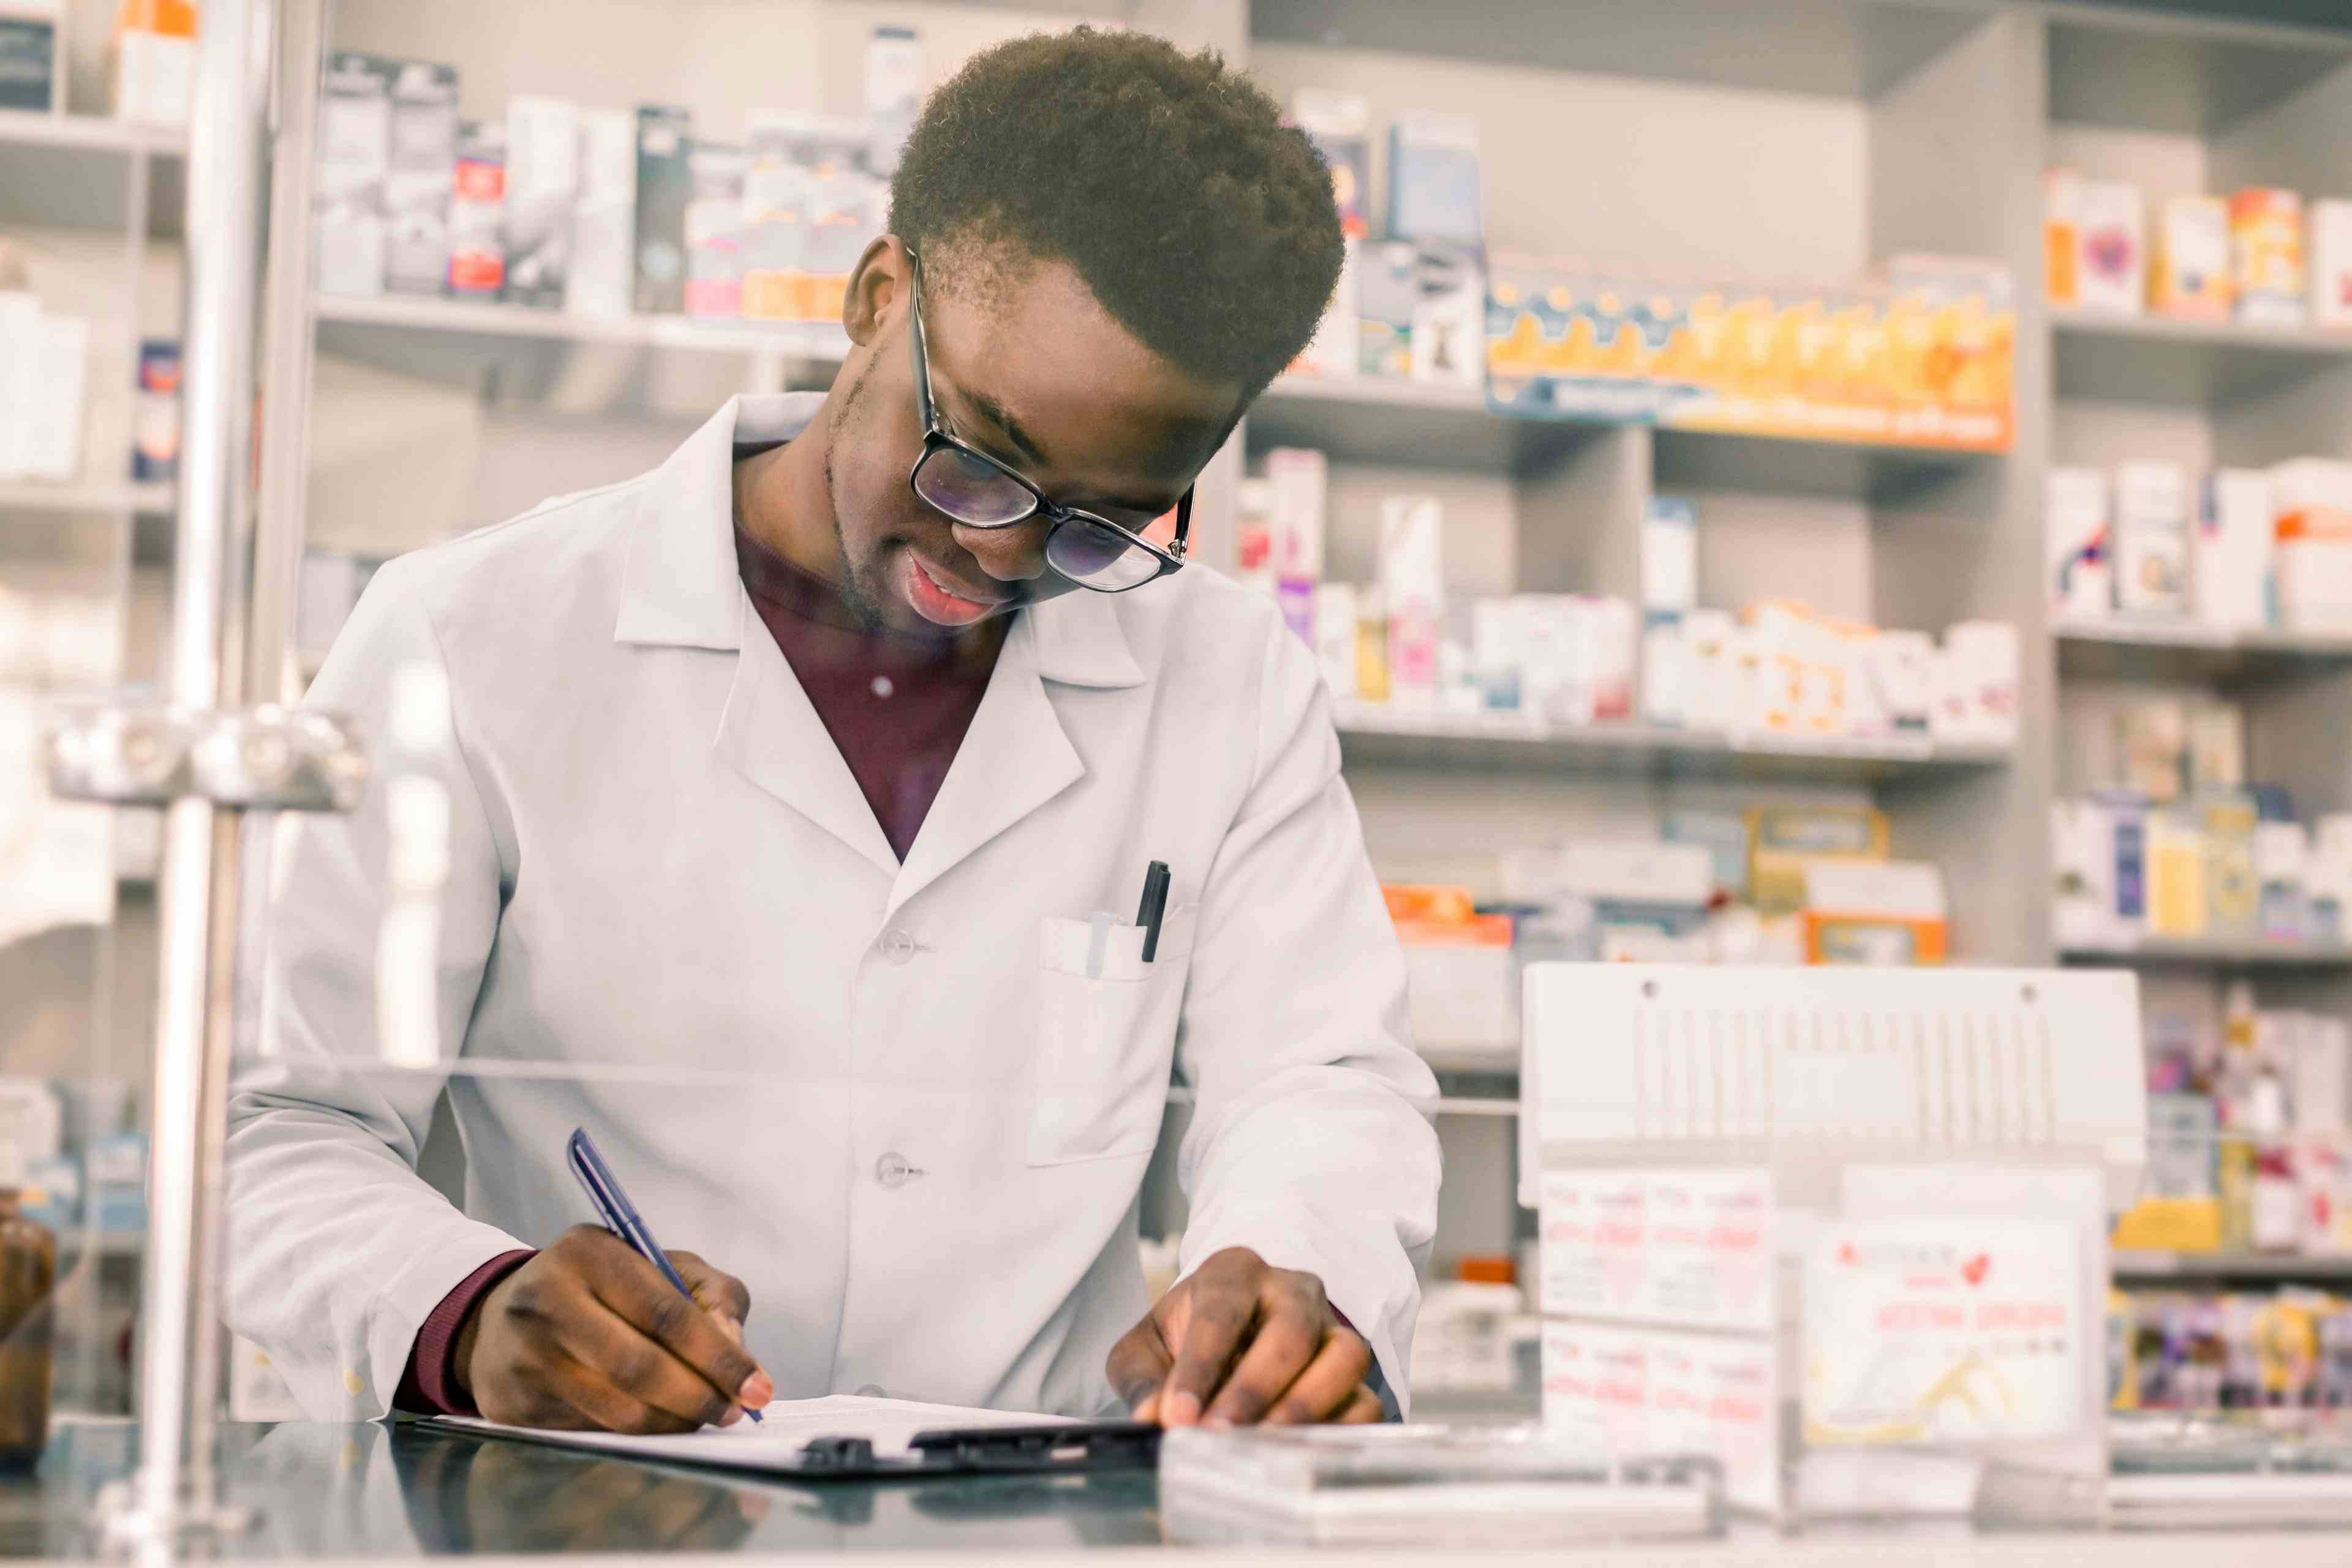 Portrait of a happy African American pharmacist writing prescription at workplace in modern pharmacy | Image Credit: sofiko14 - stock.adobe.com